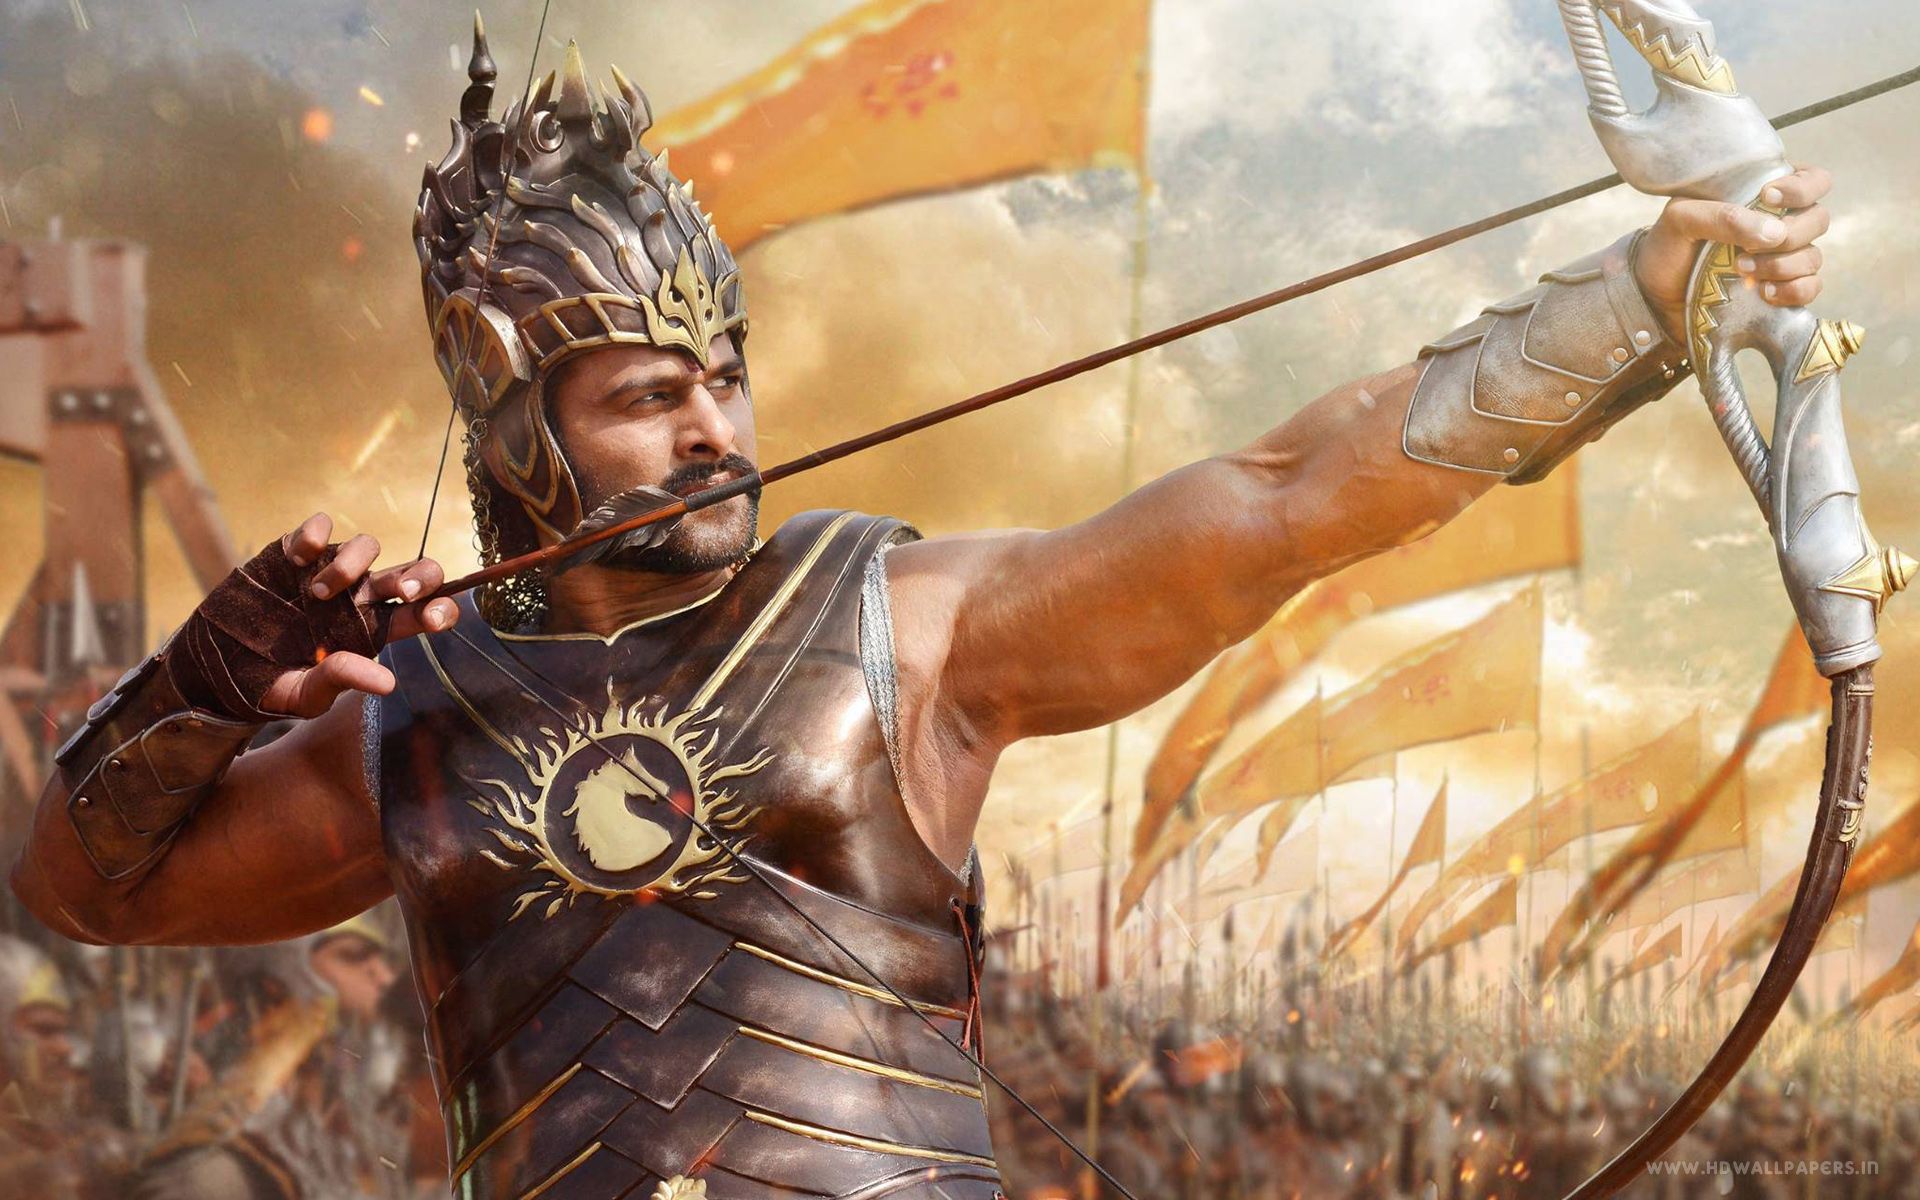 Prabhas 4K wallpaper for your desktop or mobile screen free and easy to download